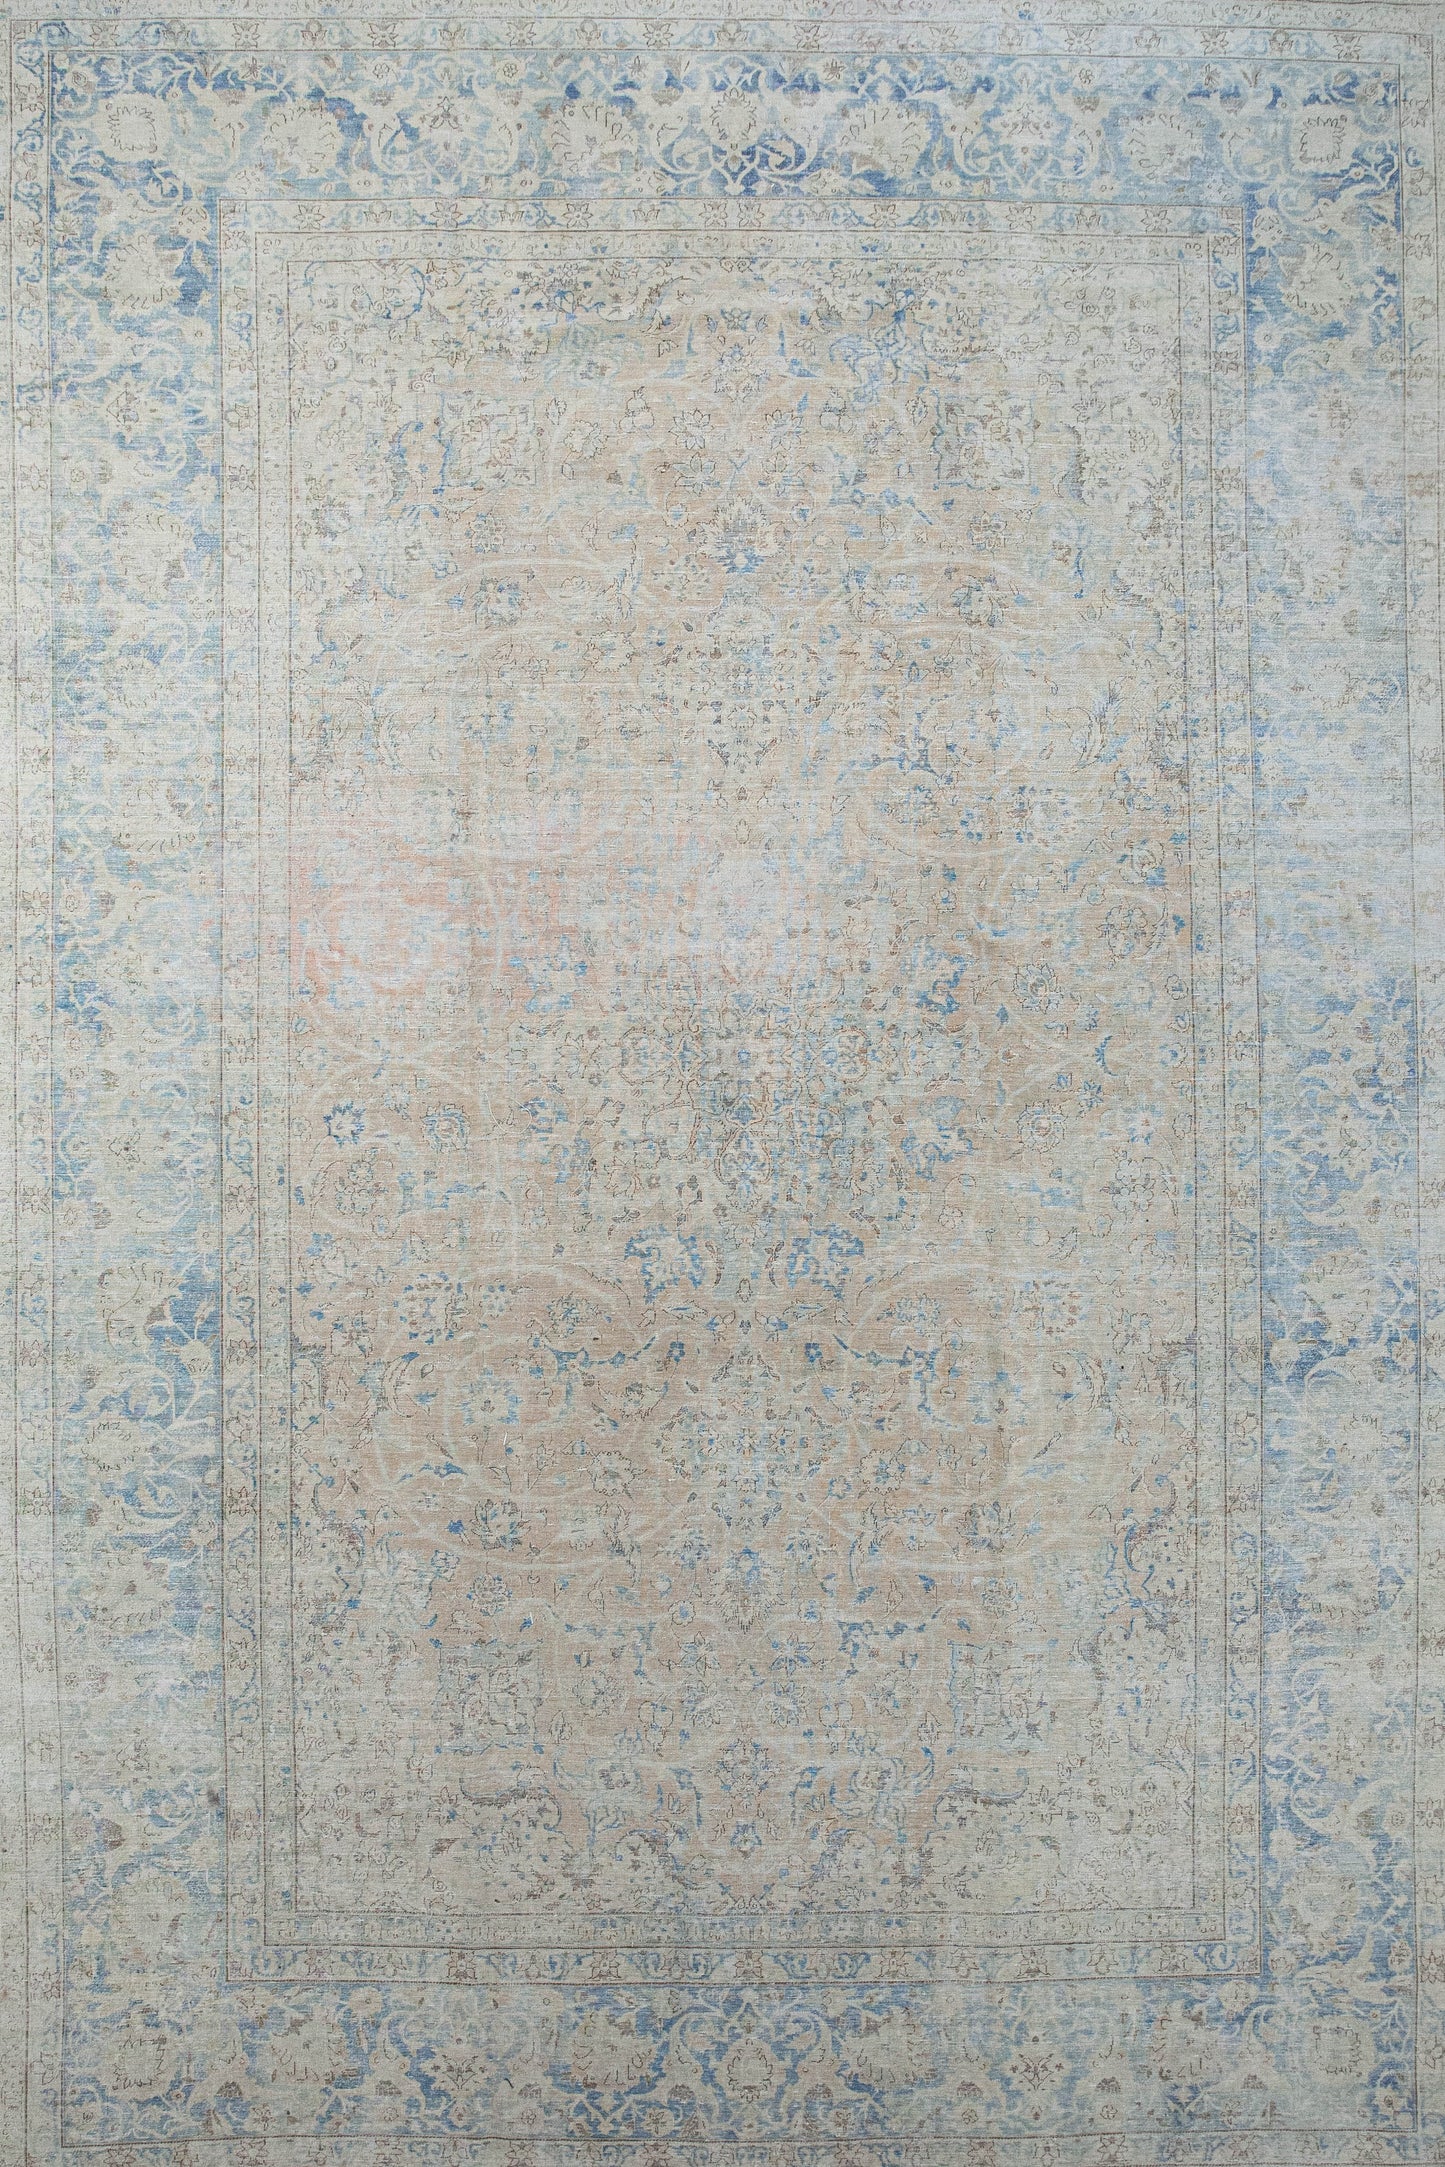 Vintage rug with a distressed finish and a climbing plant pattern with a light royal blue frame.